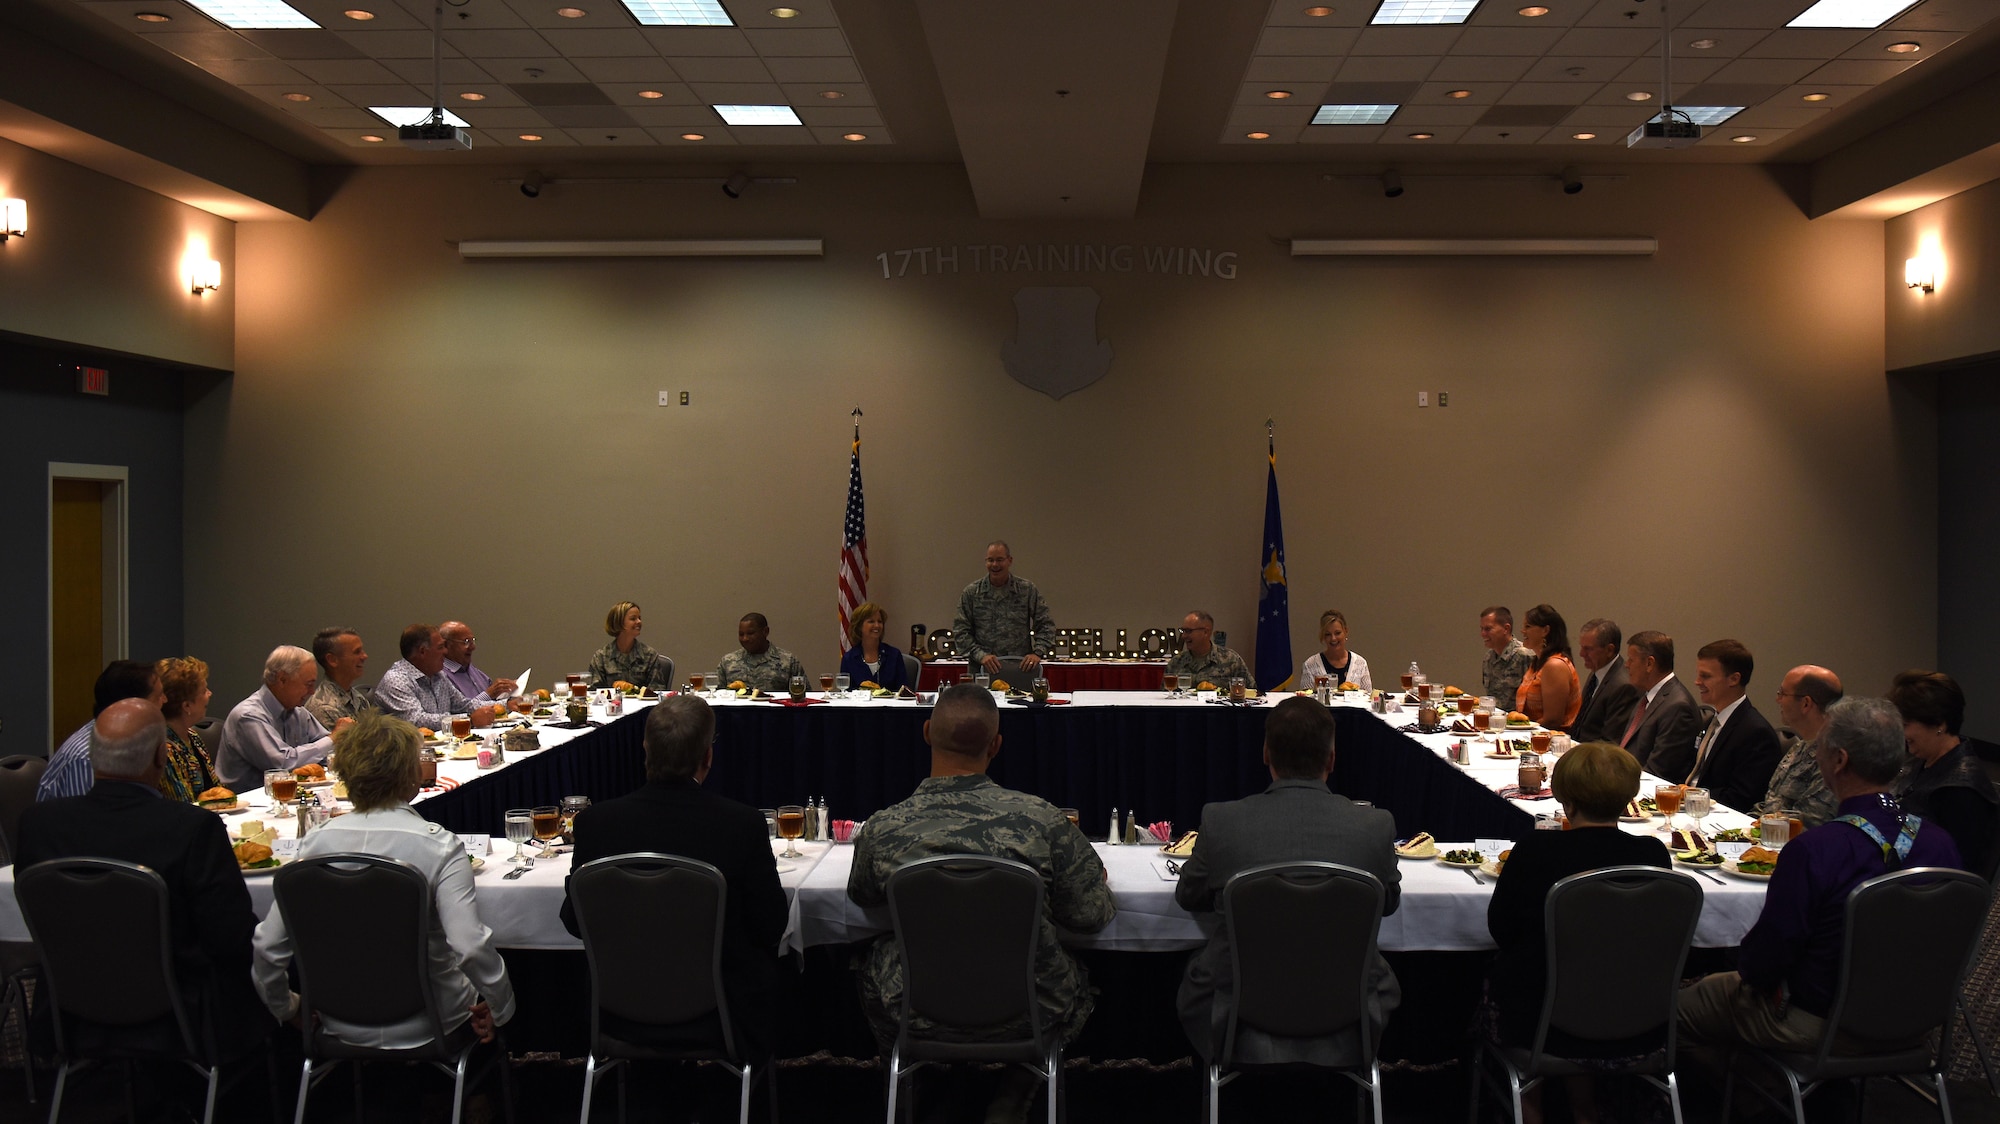 U.S. Air Force Maj. Gen. Bob LaBrutta, 2nd Air Force Commander, meets key San Angelo community members during a luncheon at the Event Center on Goodfellow Air Force Base, Texas, Oct. 6, 2016. LaBrutta visited Goodfellow
and the city of San Angelo as part of his tour of 2nd Air Force bases. (U.S. Air Force photo by Airman 1st Class Caelynn Ferguson/Released)
